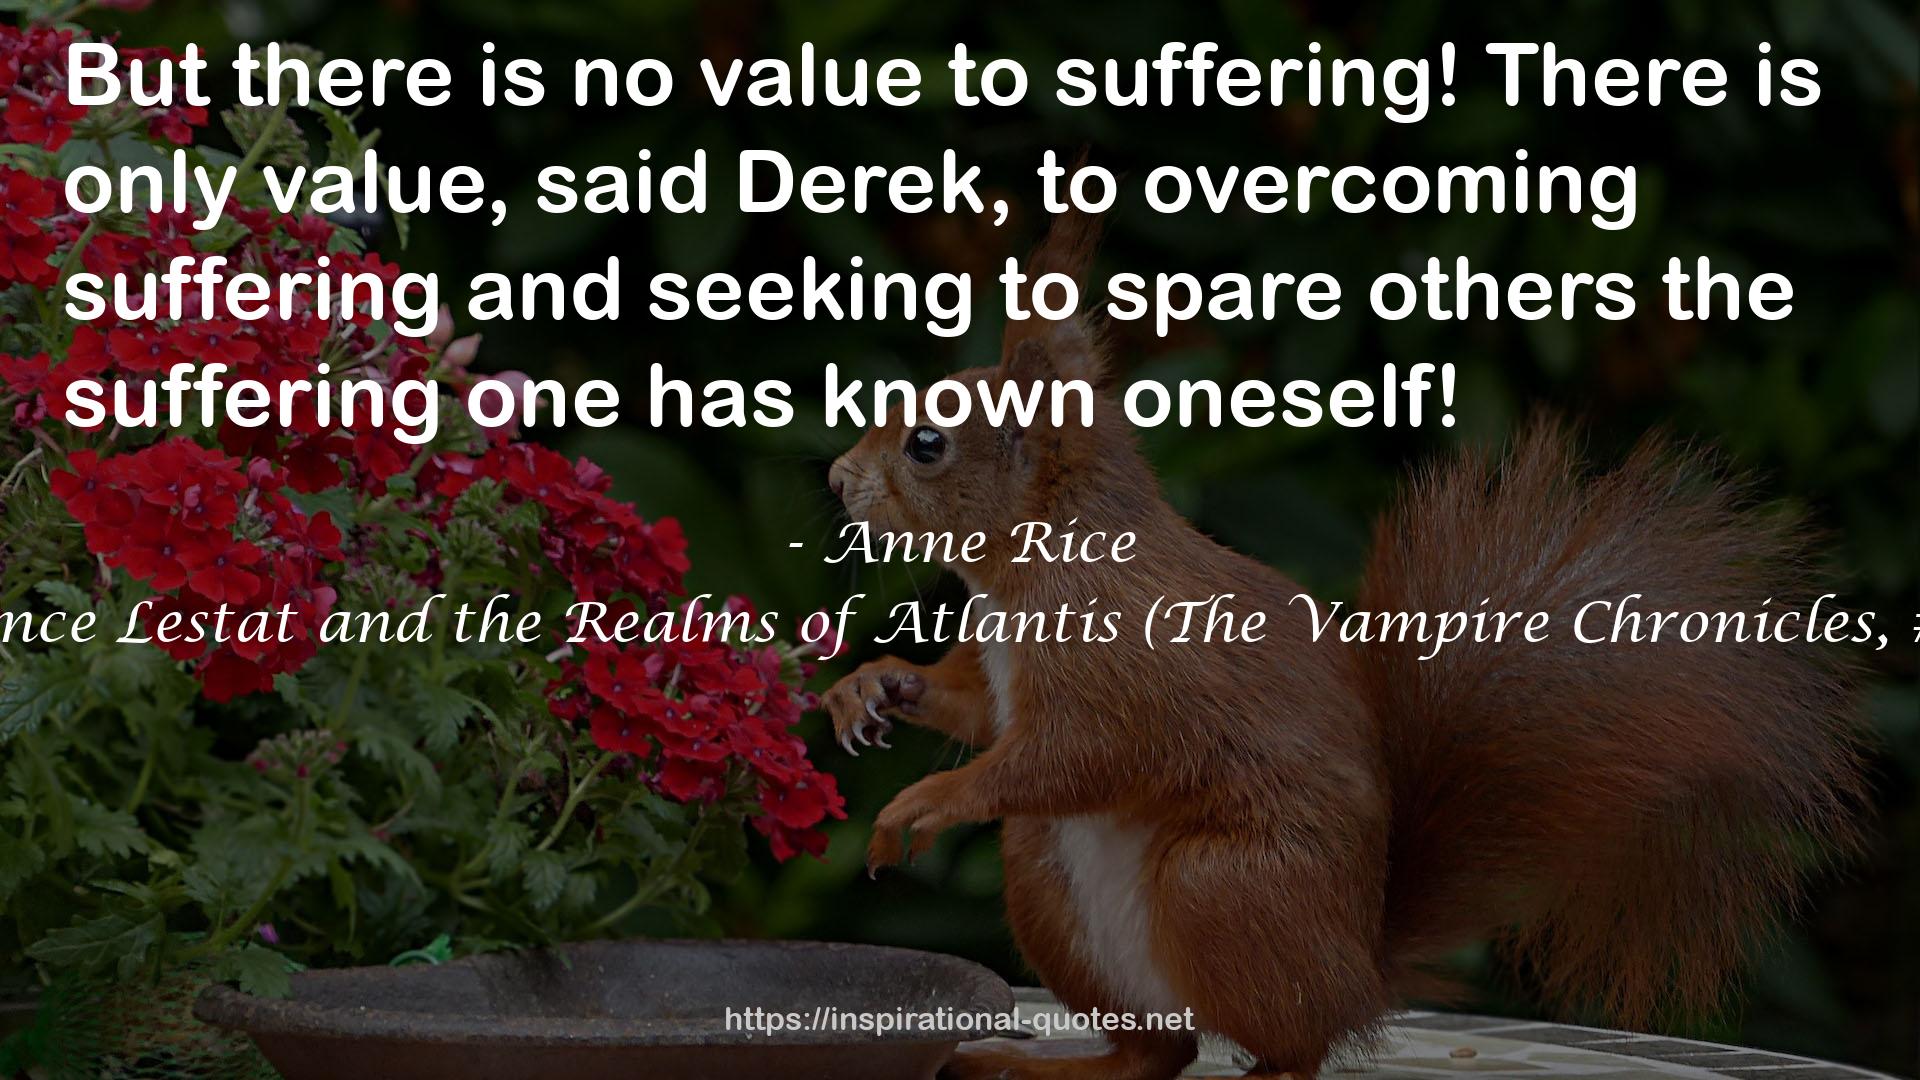 Prince Lestat and the Realms of Atlantis (The Vampire Chronicles, #12) QUOTES